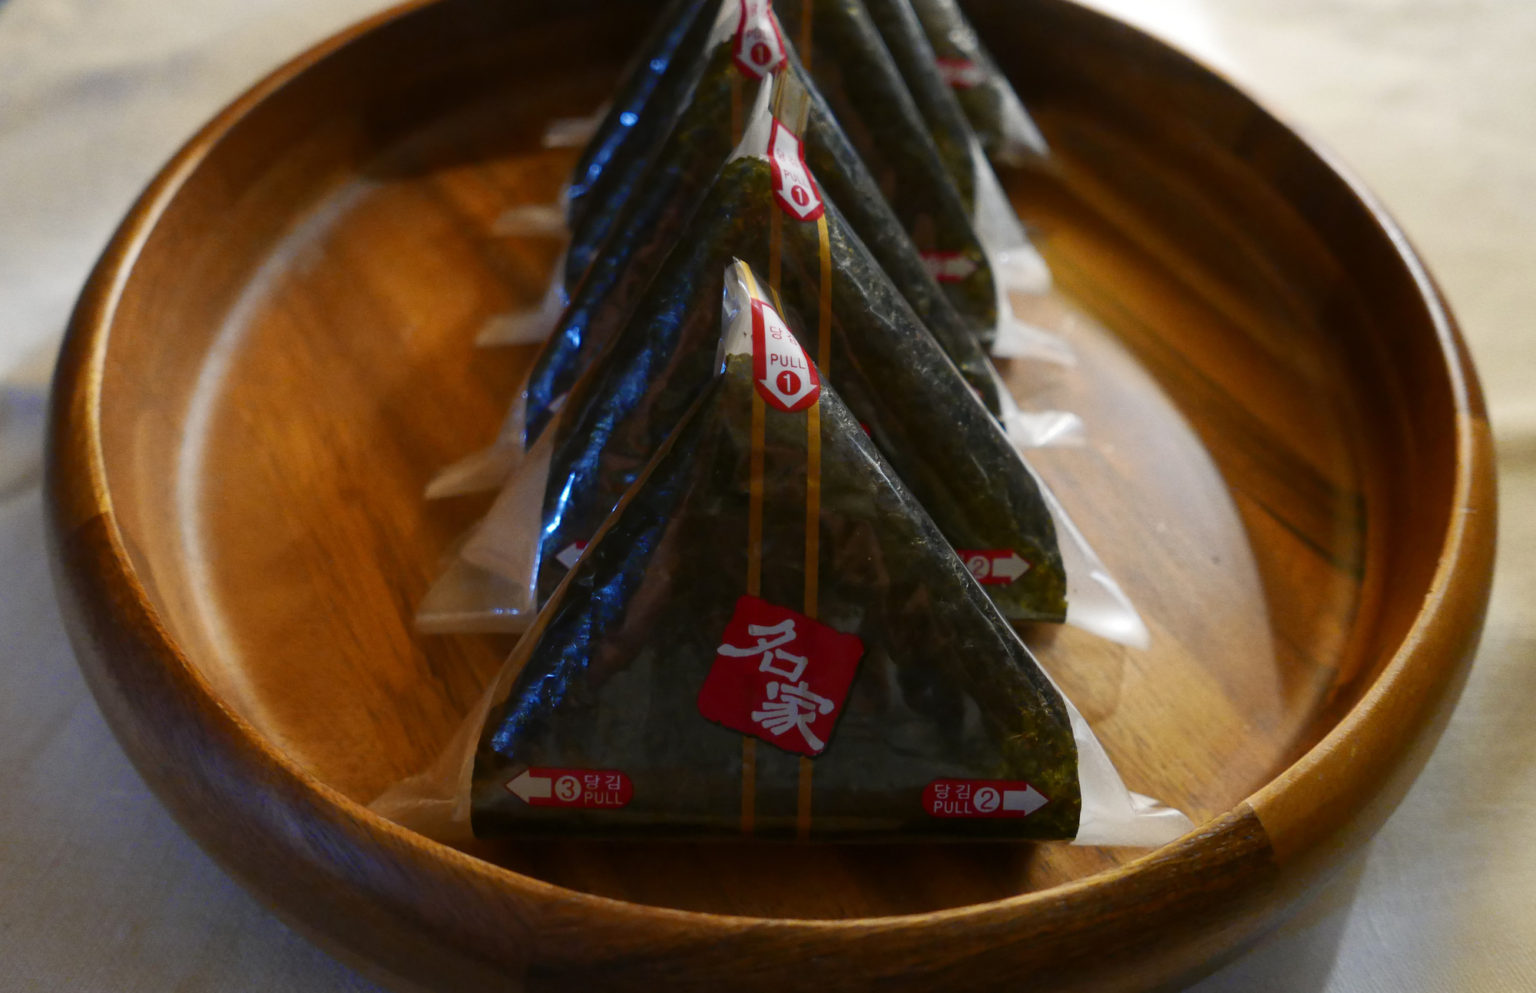 Triangle kimbap lined up on a wooden tray. 